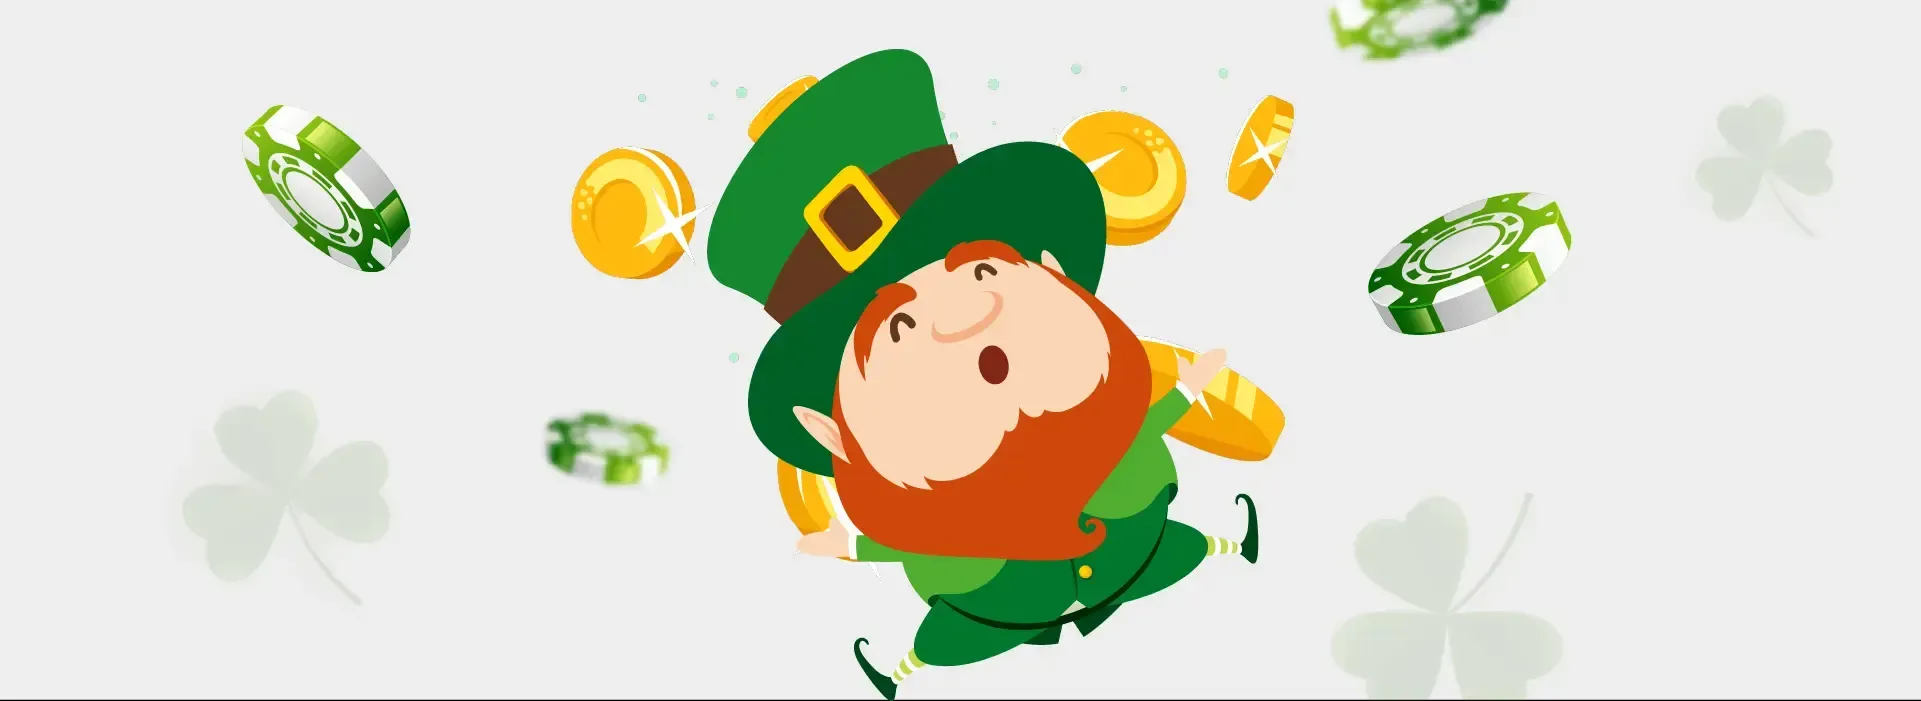 image of an Irishman with red beard and a green hat